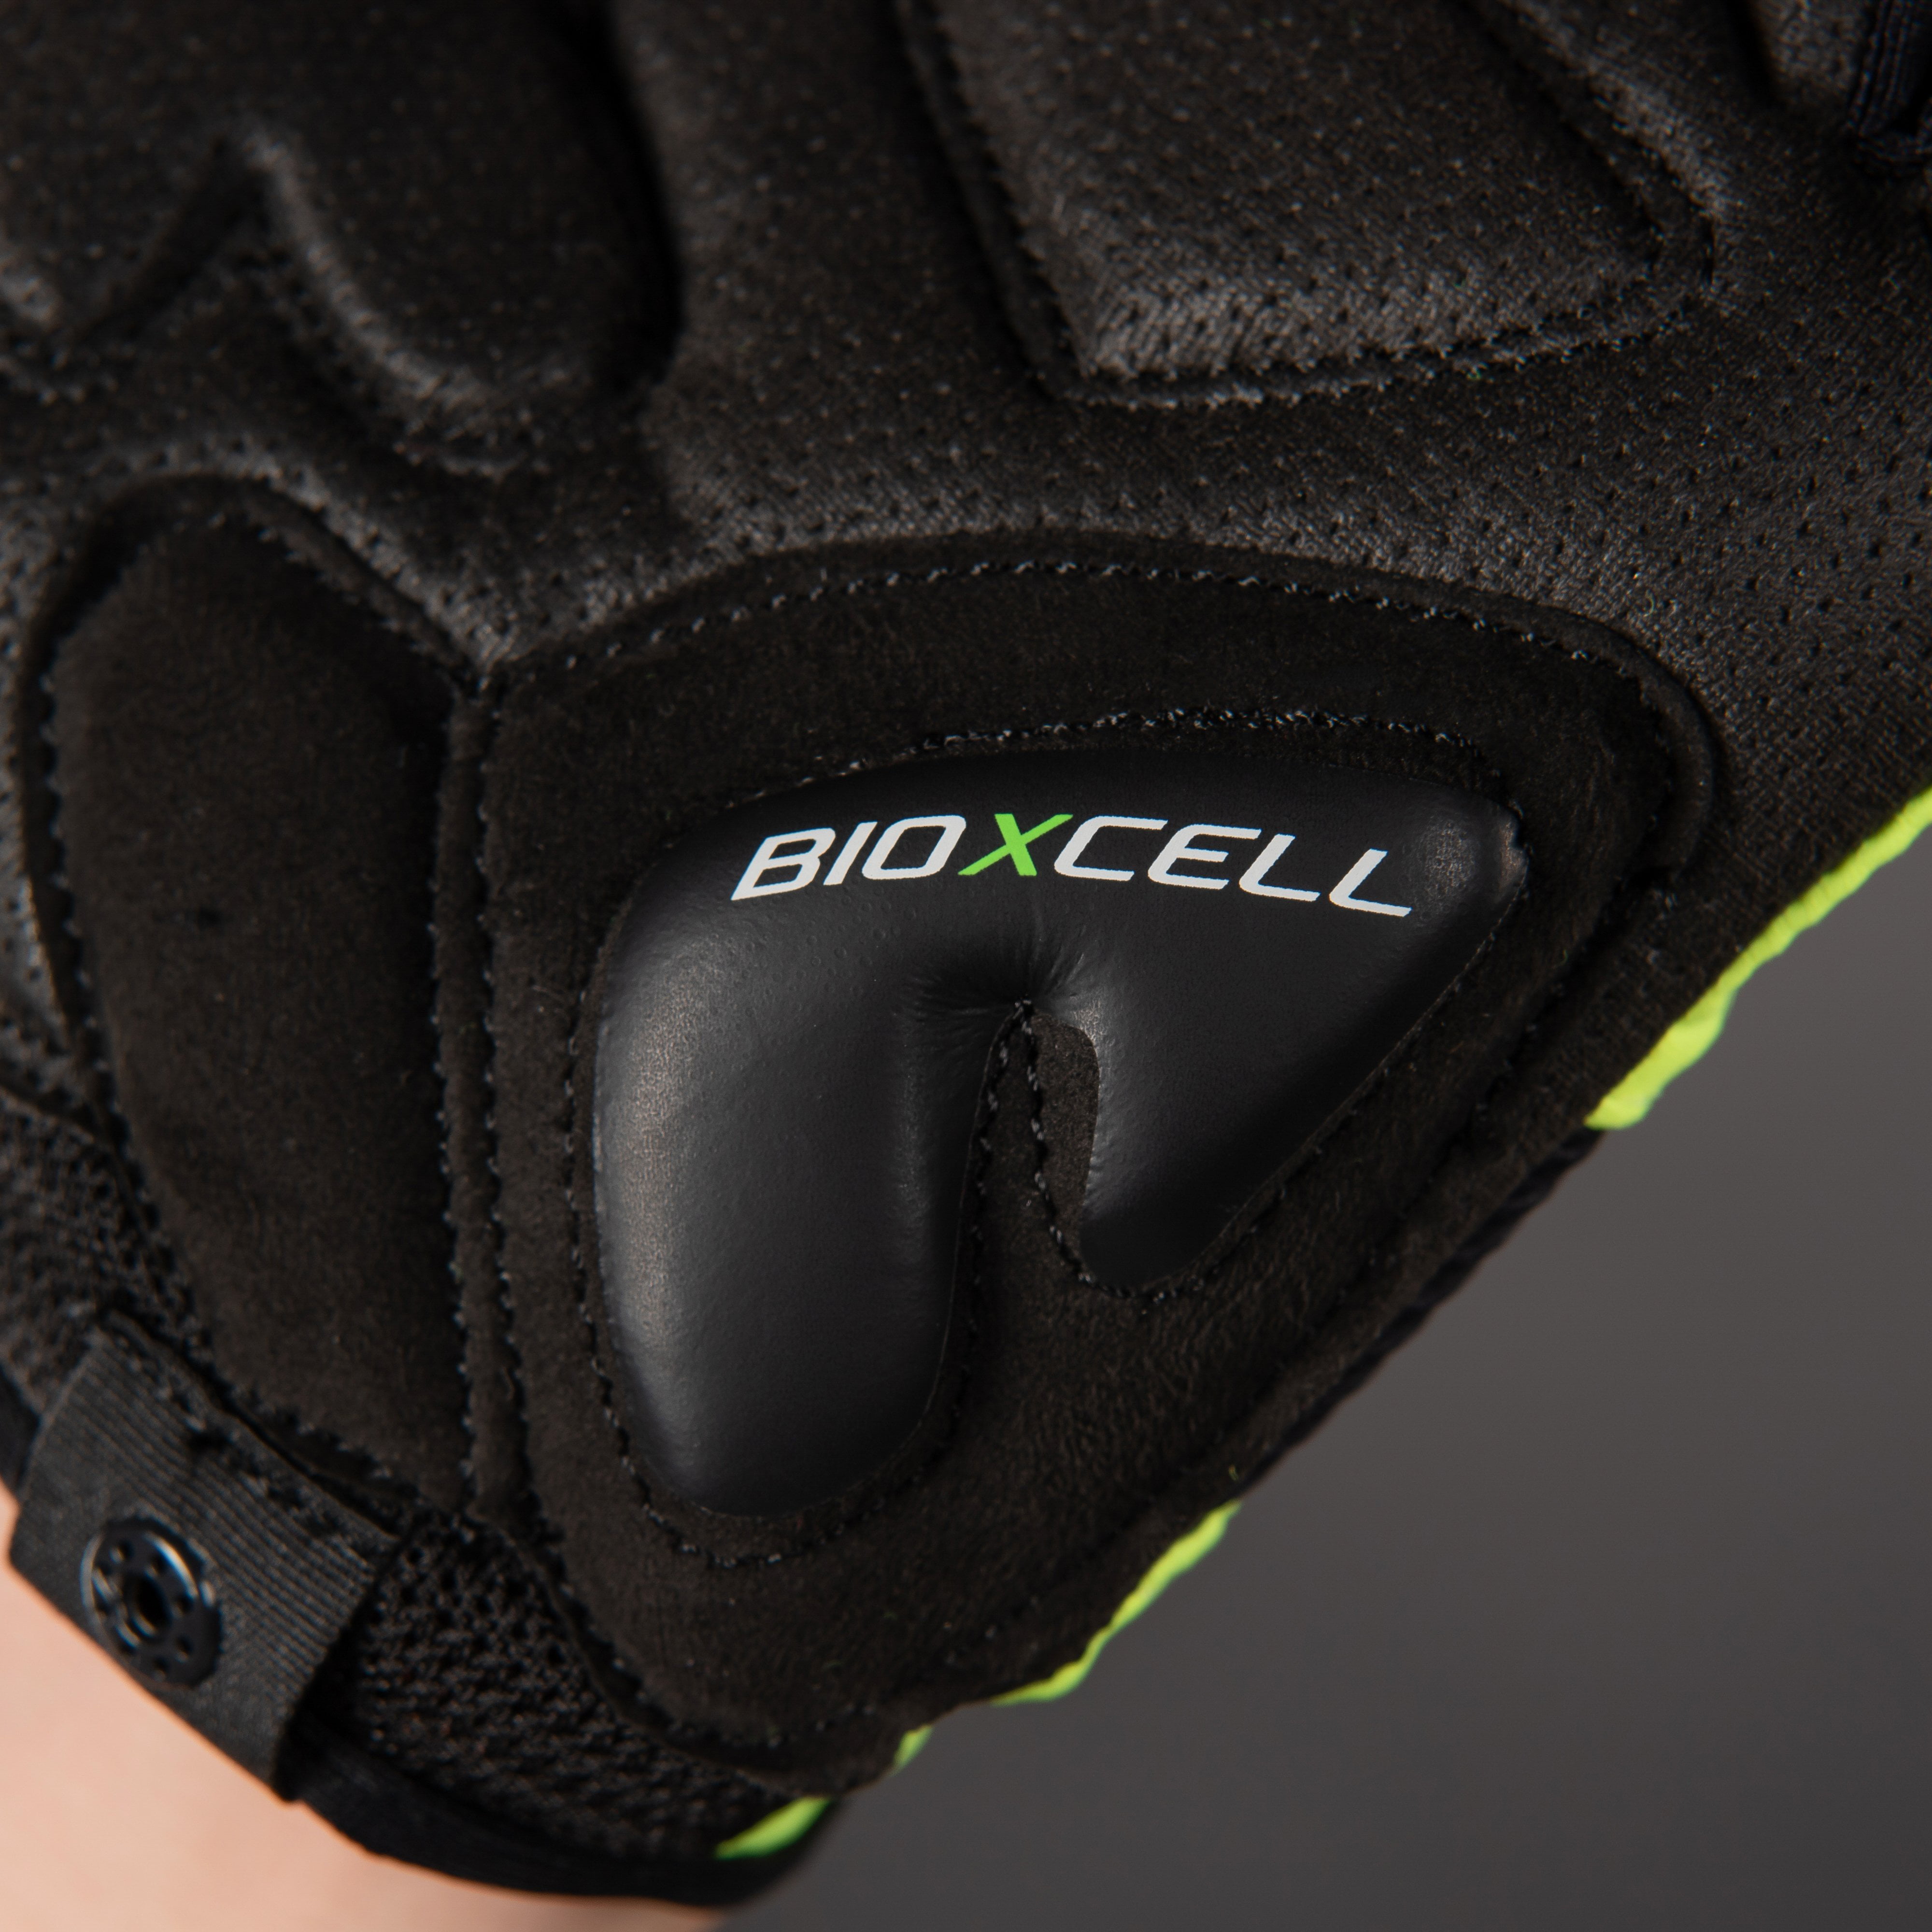 Details about   Chiba Gloves BioXCell Classic Bike Gloves Neon Yellow XXL 